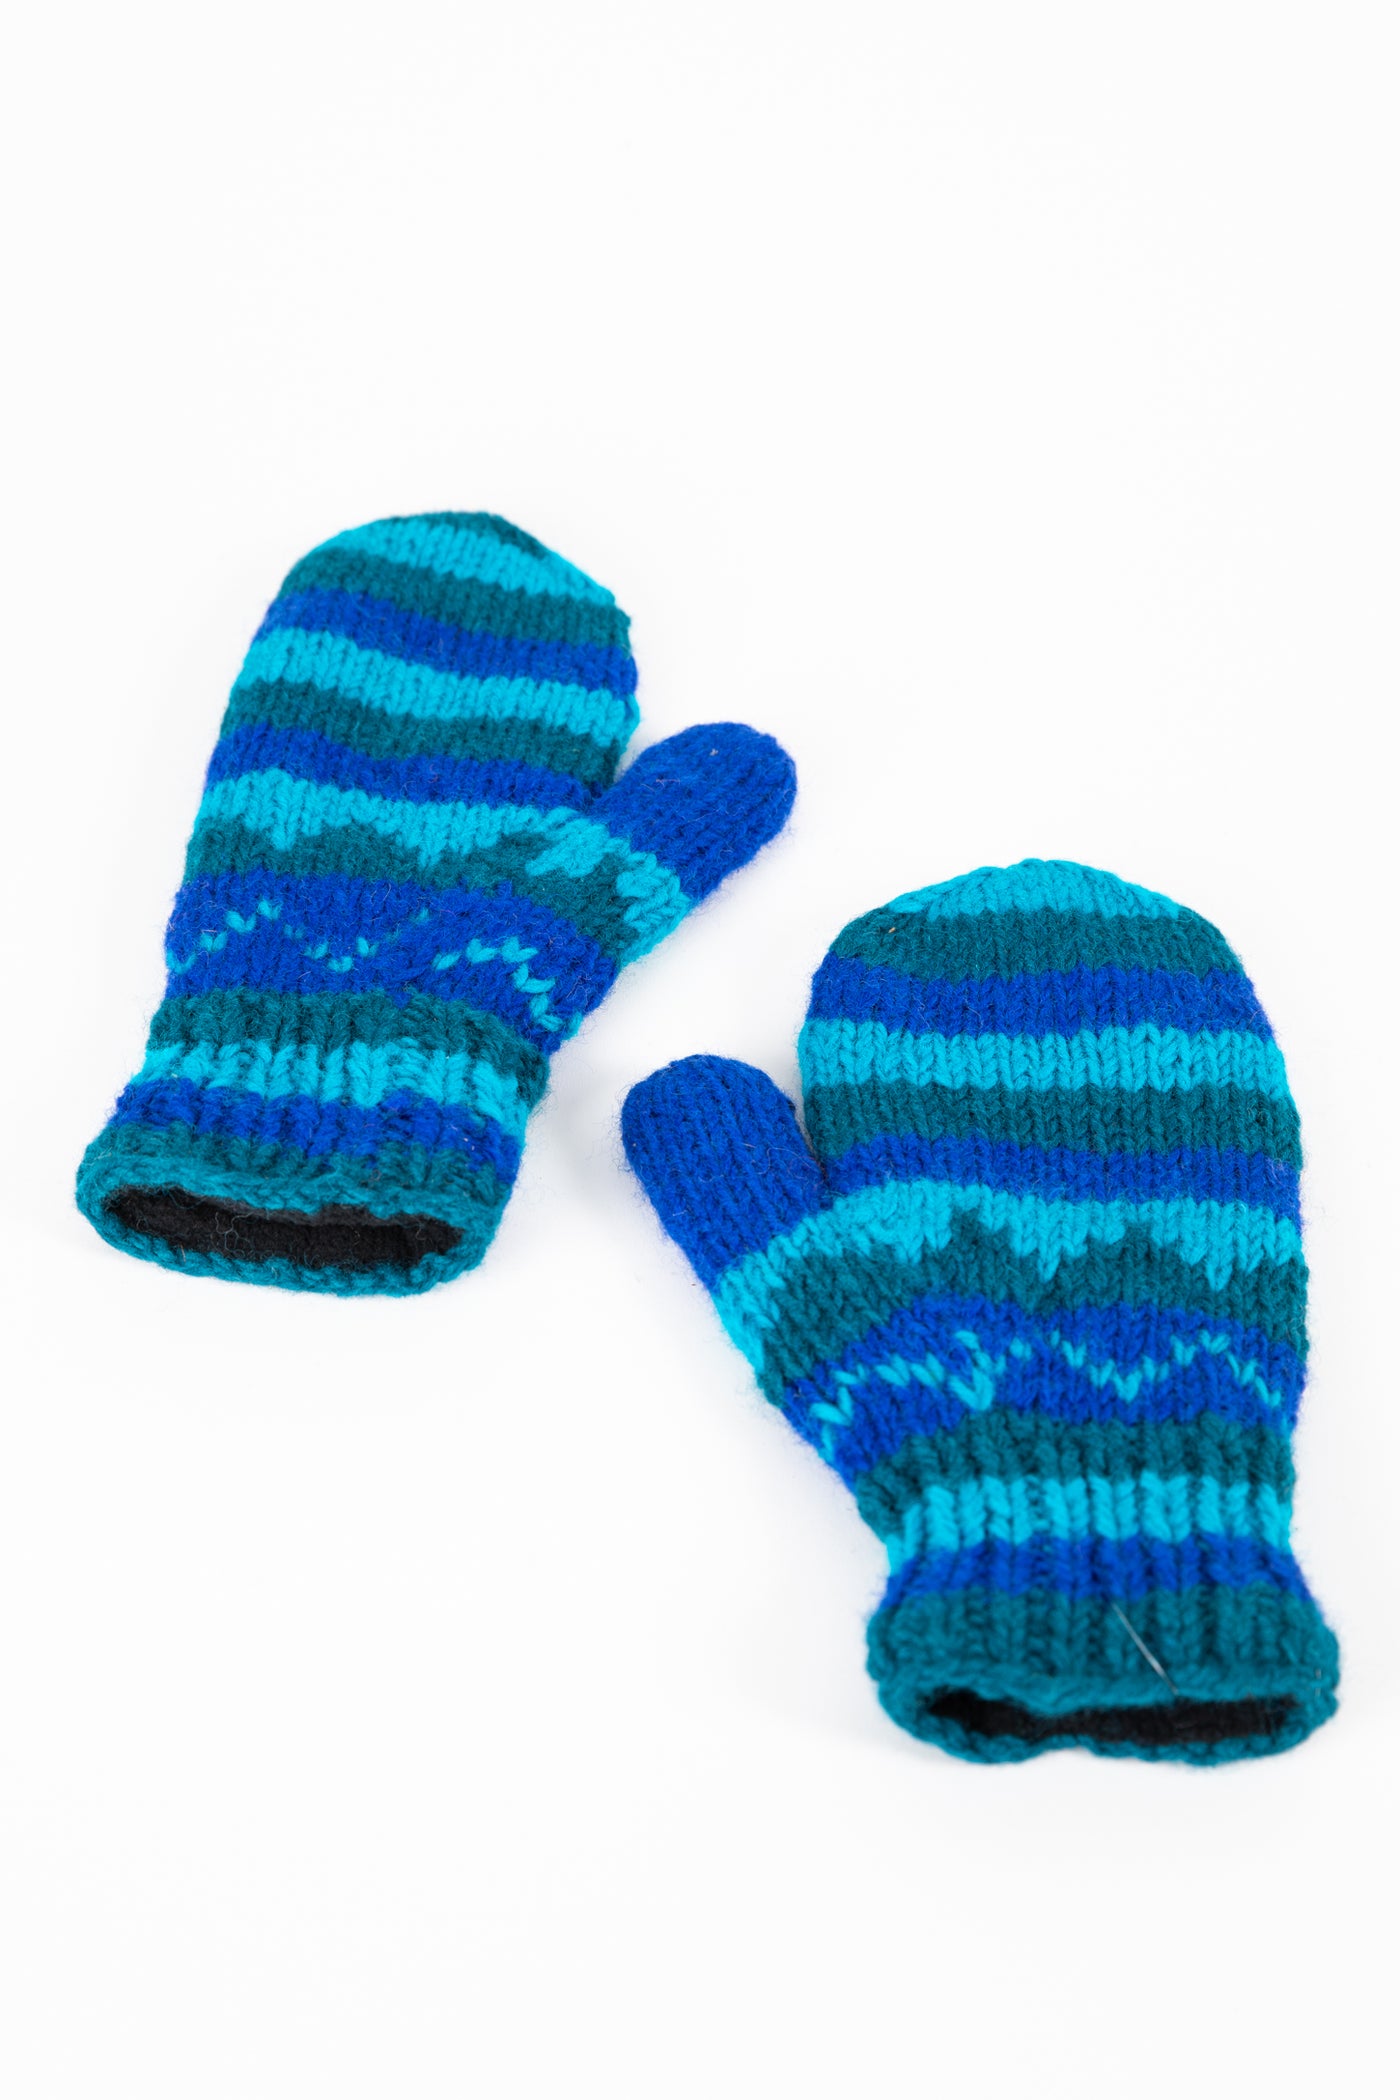 Lahara Patterned Mittens